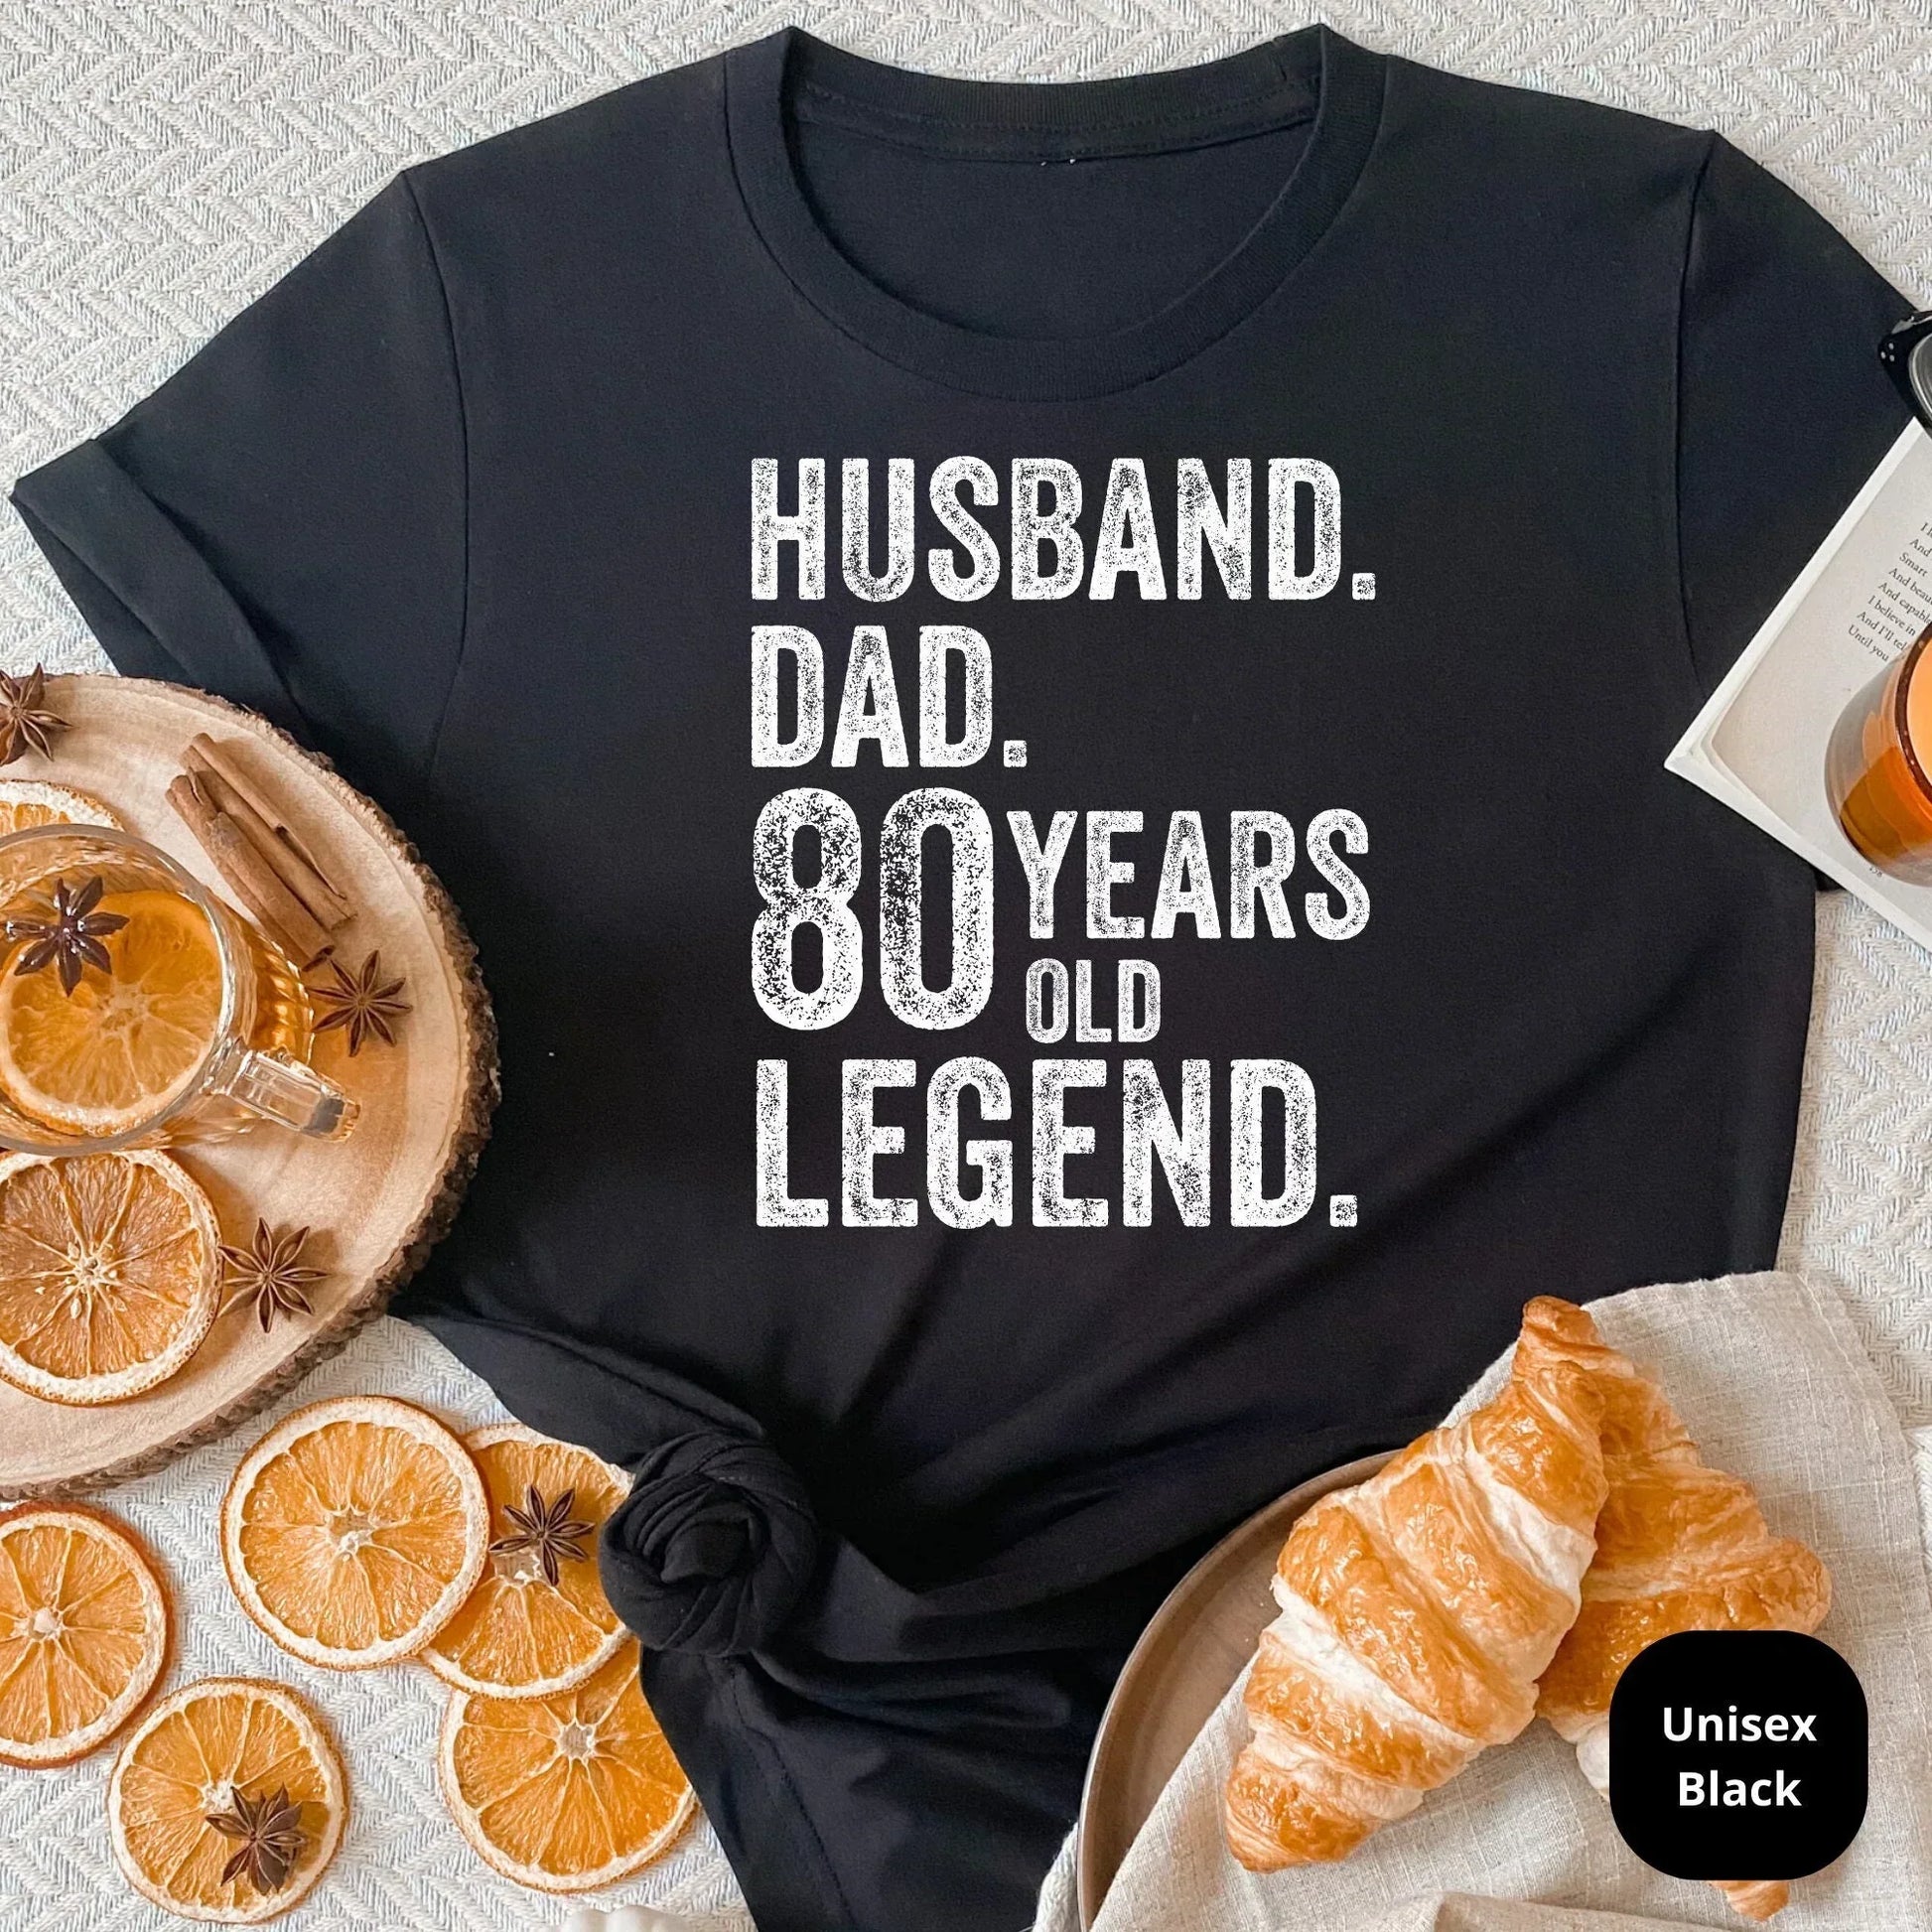 Husband, Dad, 80 Year Old Legend, Celebrate a Lifetime of Memories with Our Customizable 80th Birthday Shirt HMDesignStudioUS